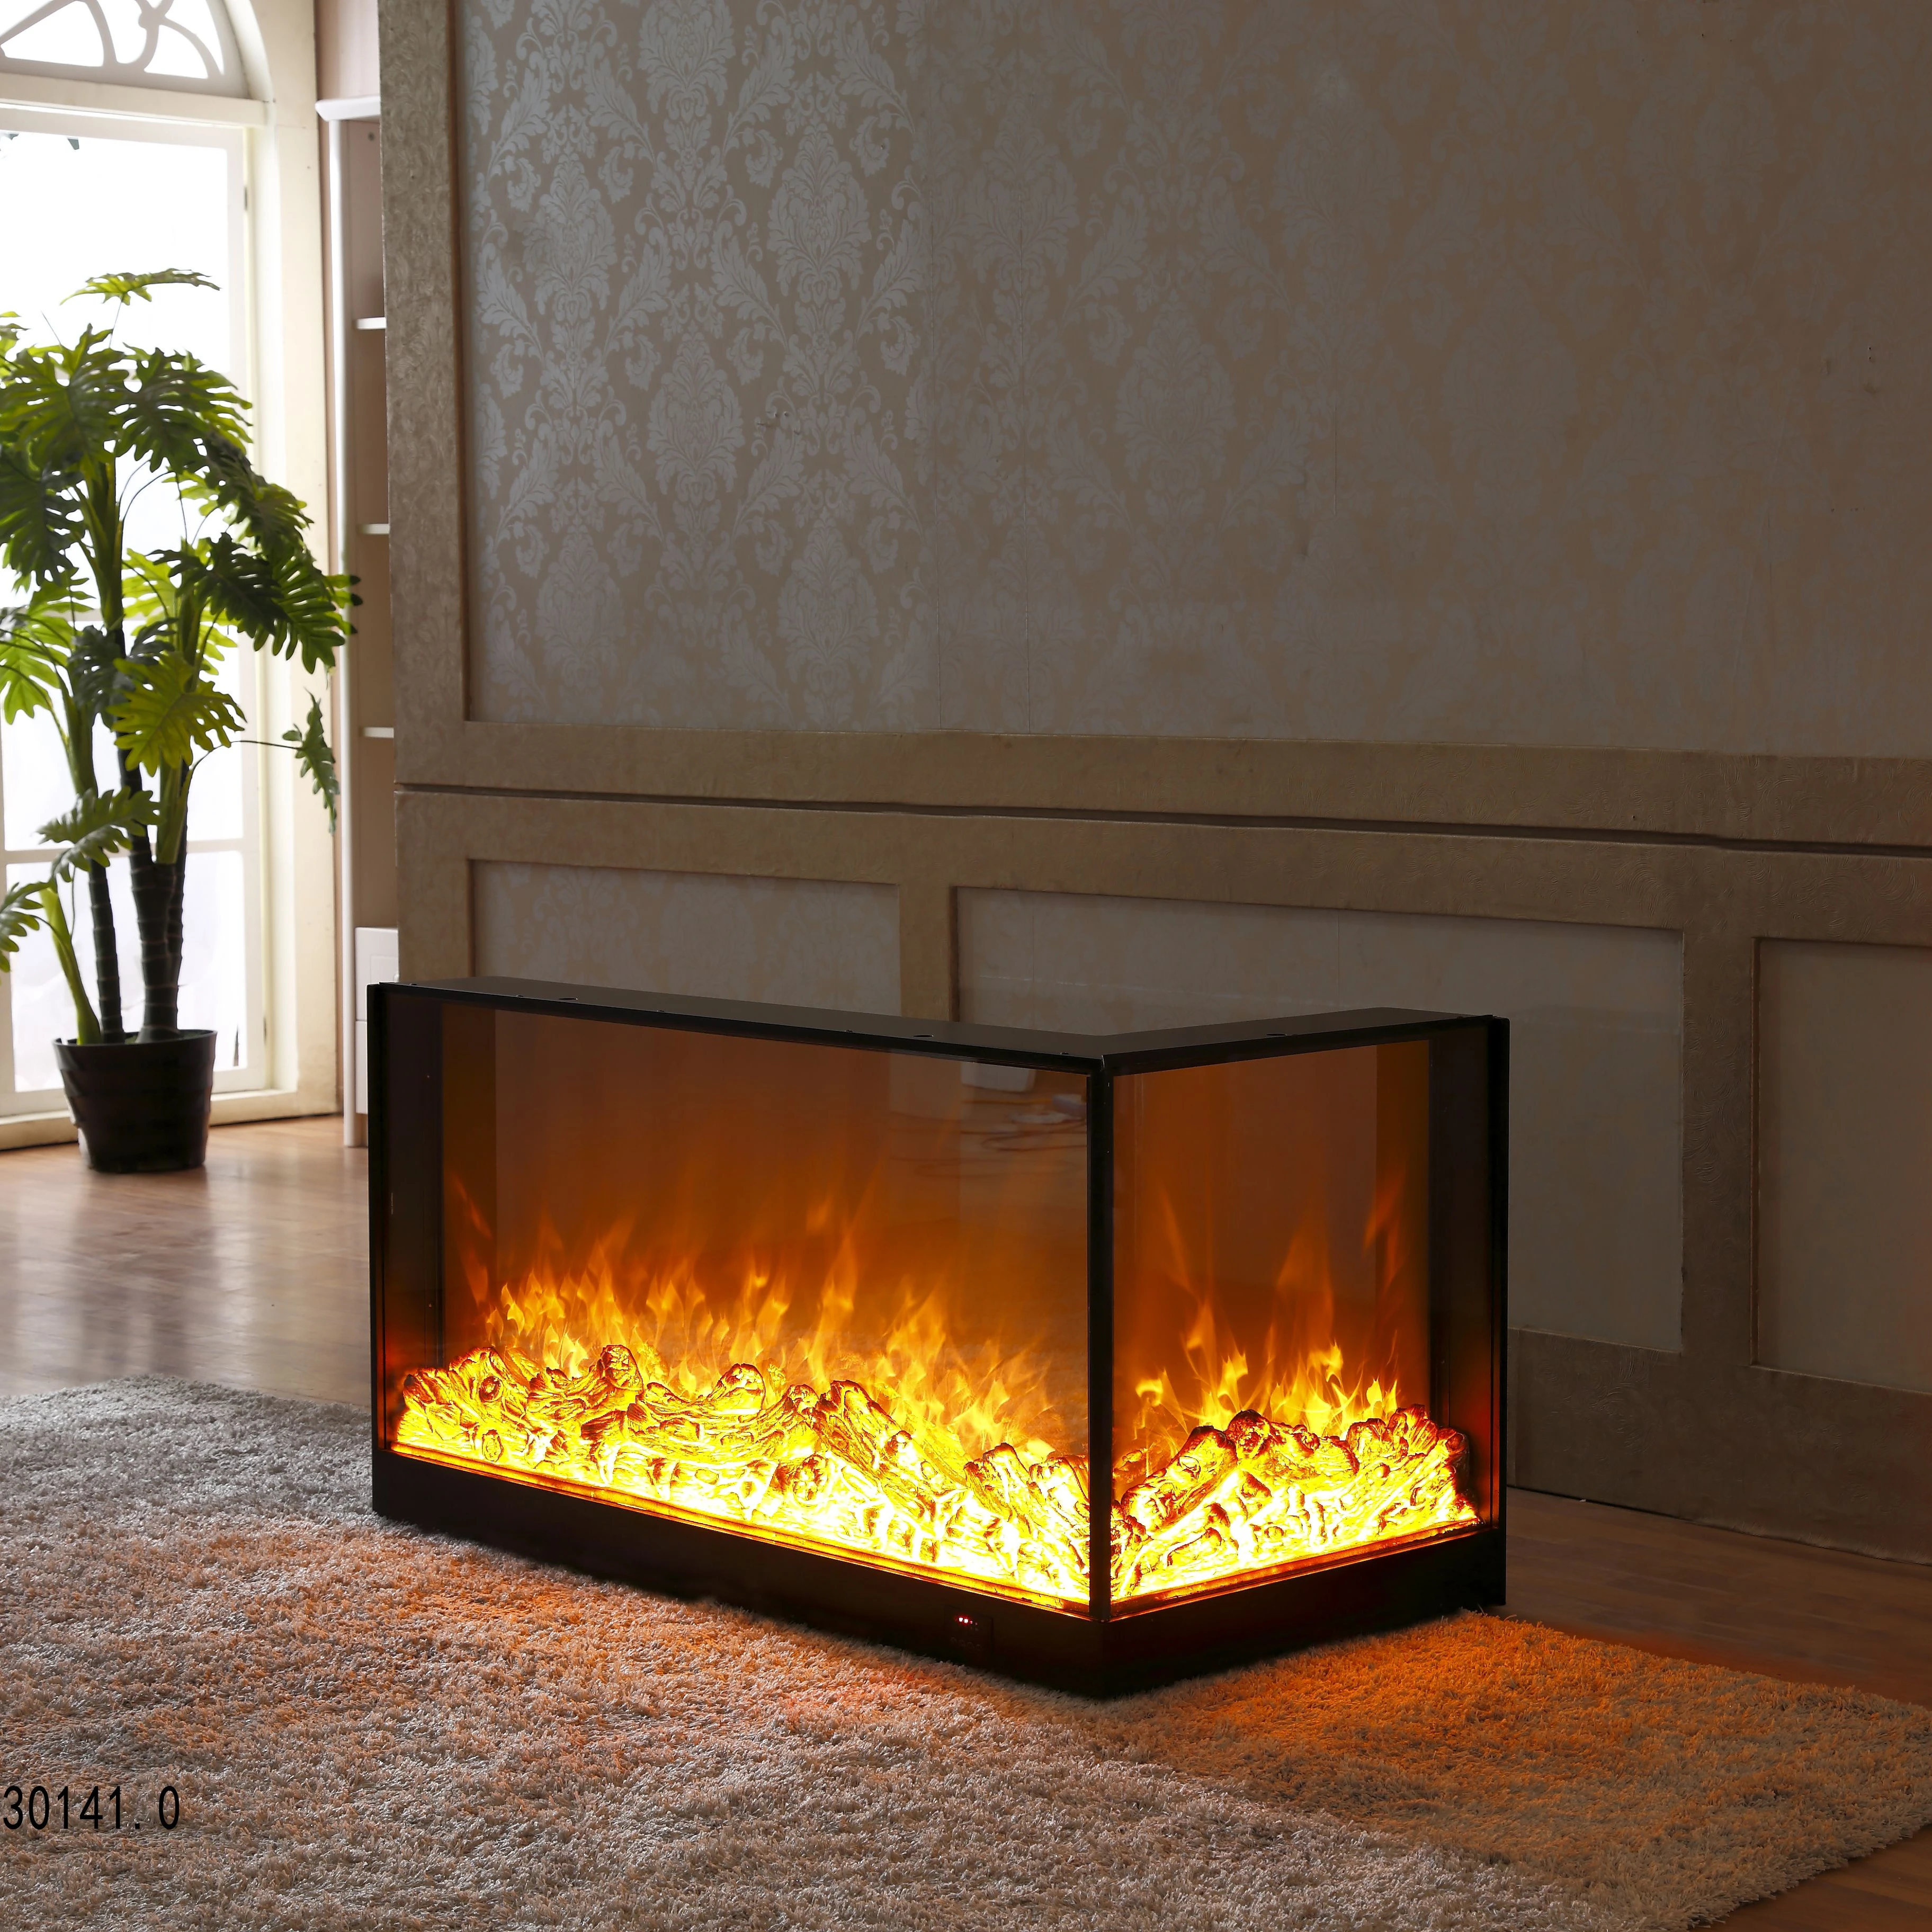 item T-308 Home Modern Simple Classical Style Modest Design Freestanding Decoration Fireplace Insert